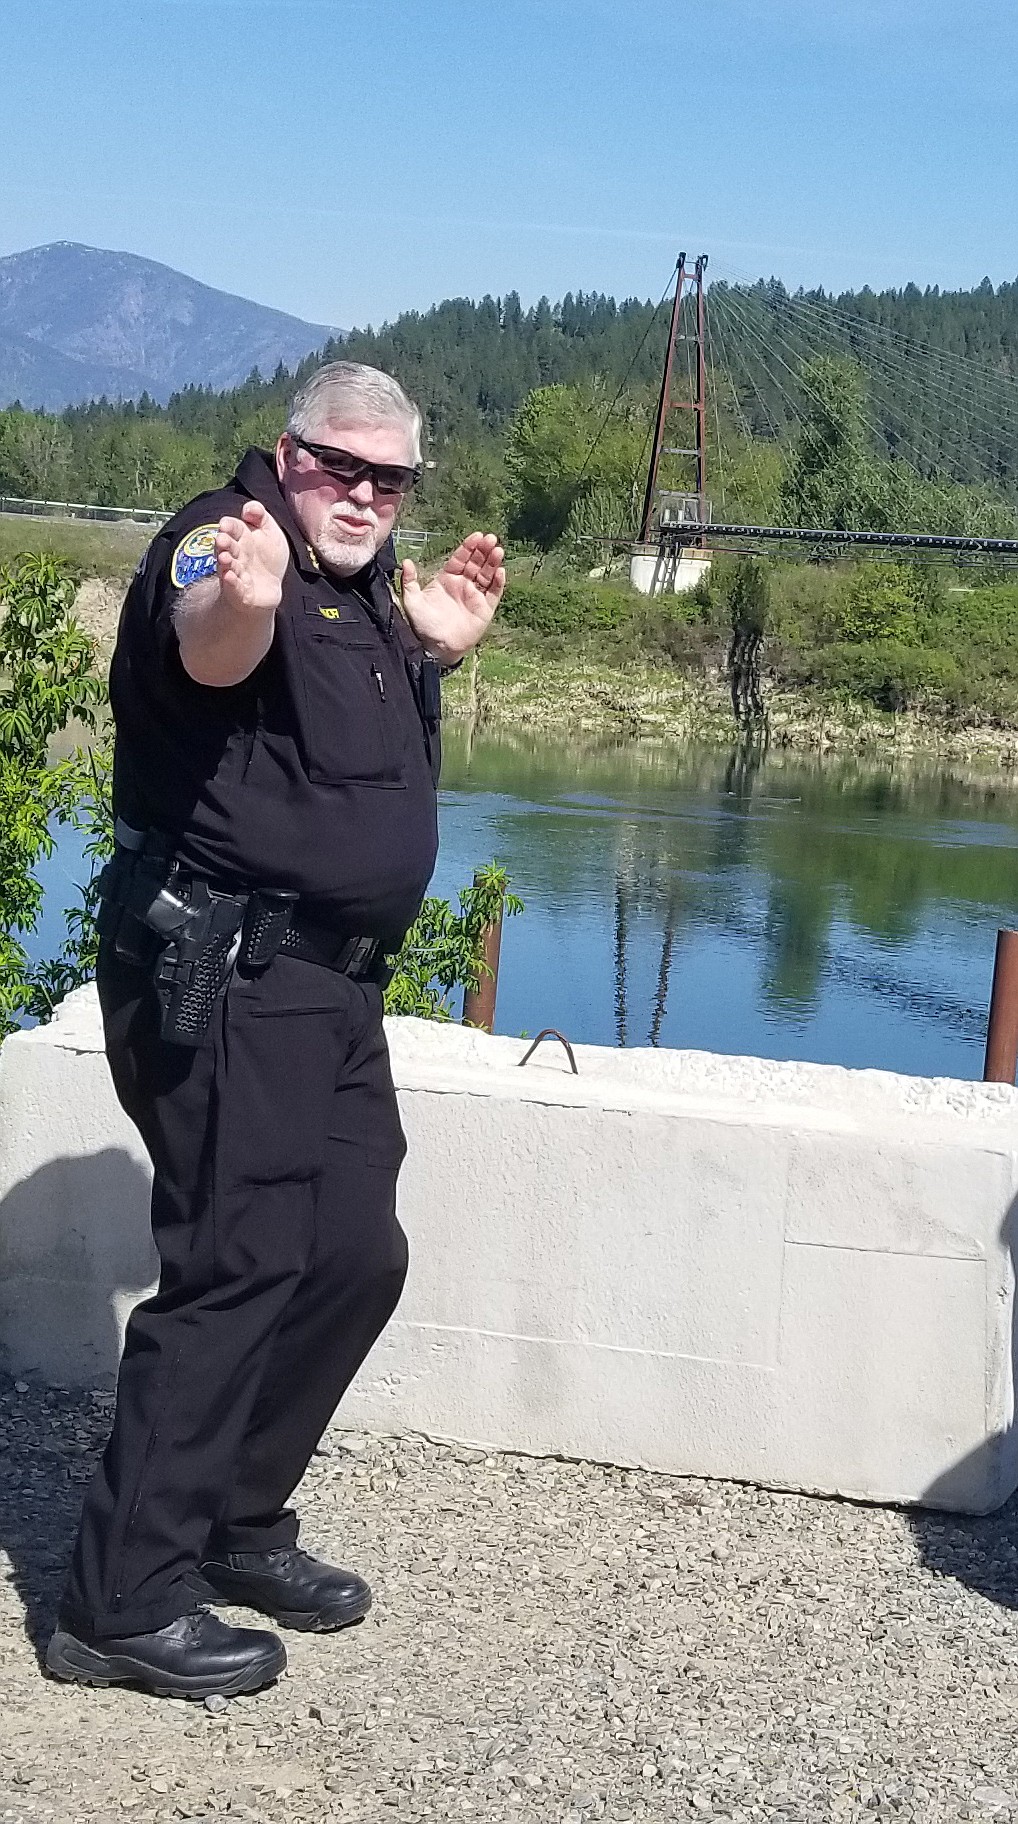 Photo by MANDI BATEMAN
As the first  Kootenai Tribe of Idaho Chief of Police, Joel Minor brought his approachable, friendly, and fun side to the job.